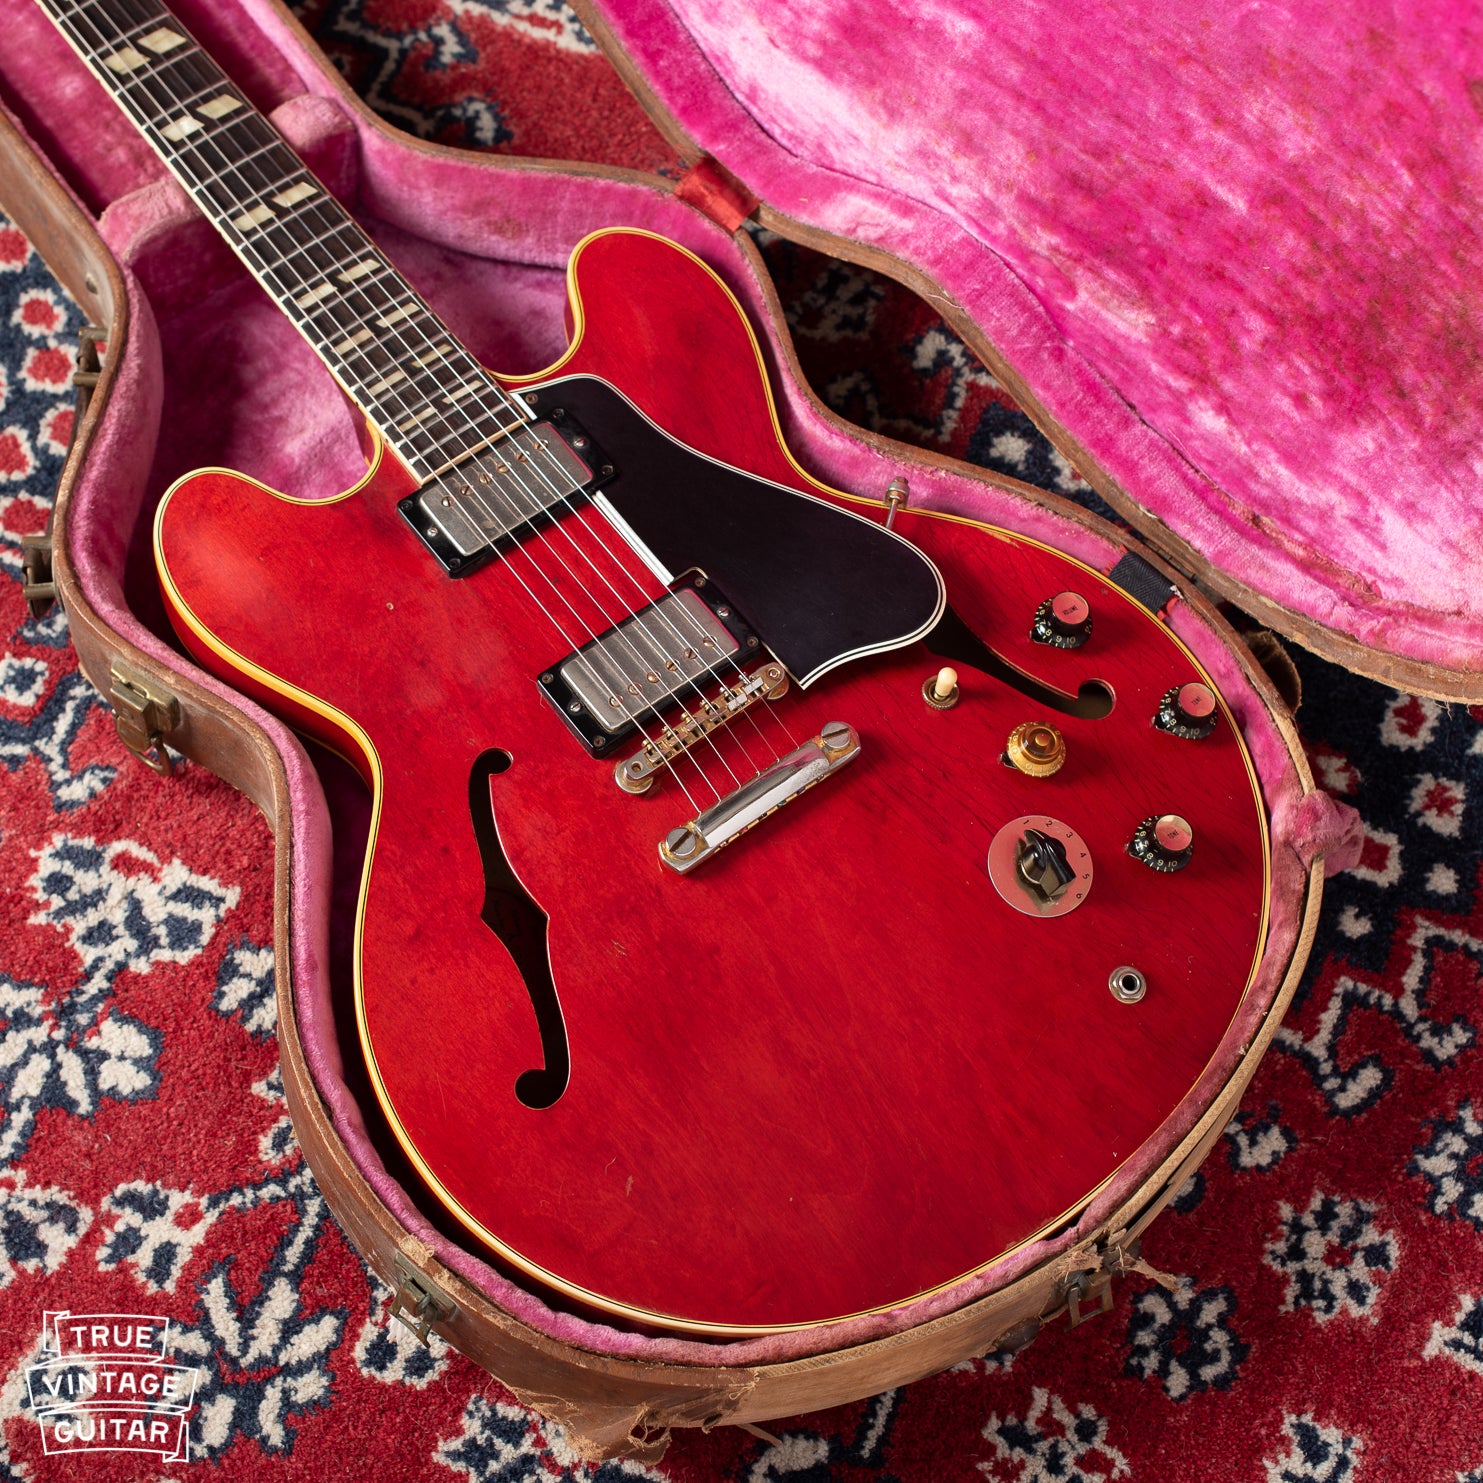 Gibson ES-345 guitar red with stop bar stop tail tailpiece and long pickguard. Pink interior case with brown exterior Lifton.